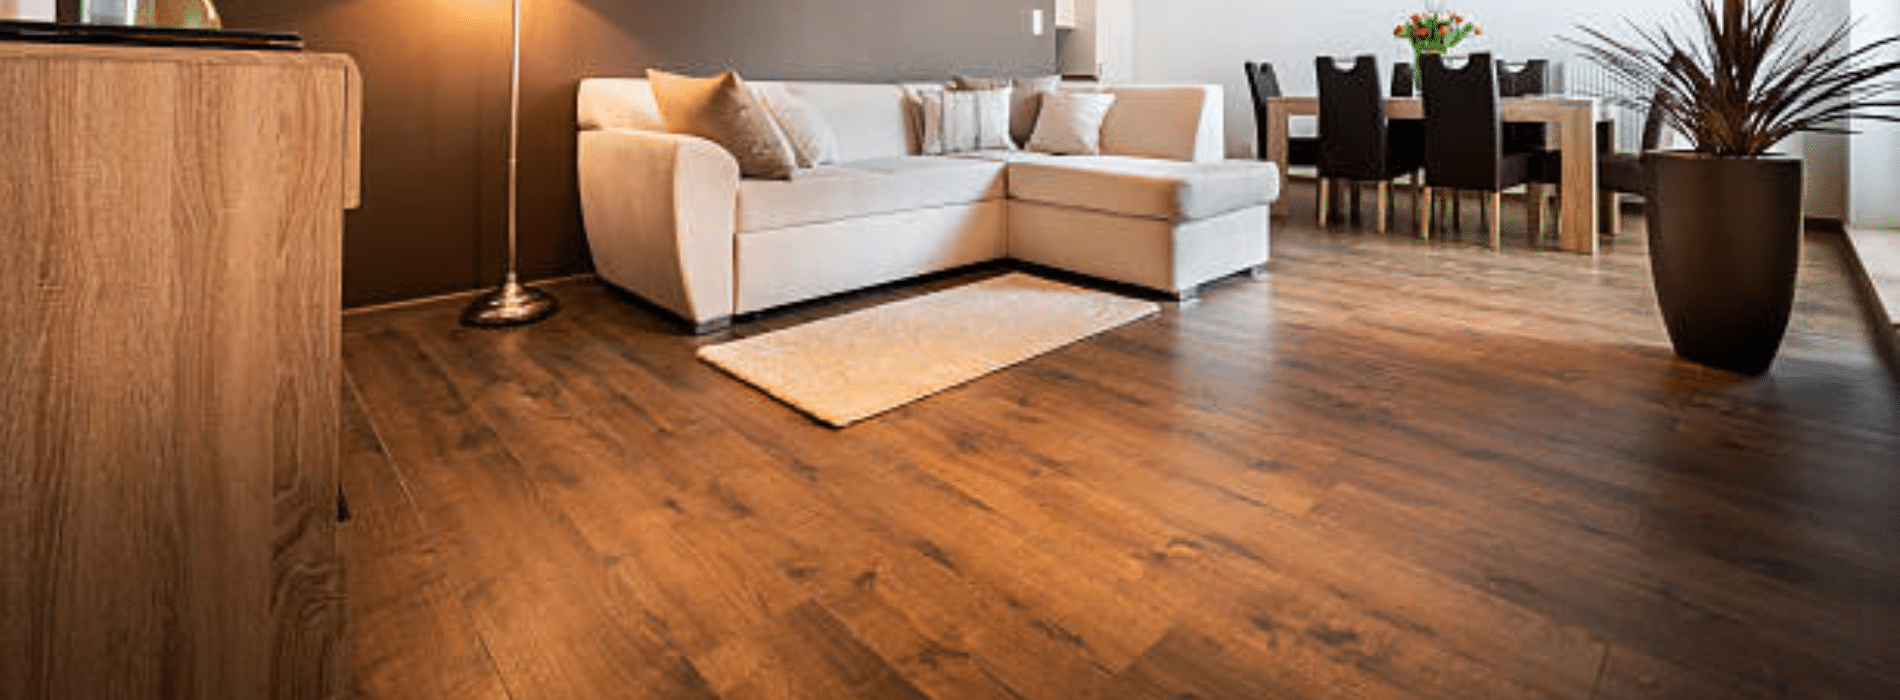 Restored engineered oak floors in Honor Oak Park with warm mid-oak stain and Junckers Strong satin finish for durability.